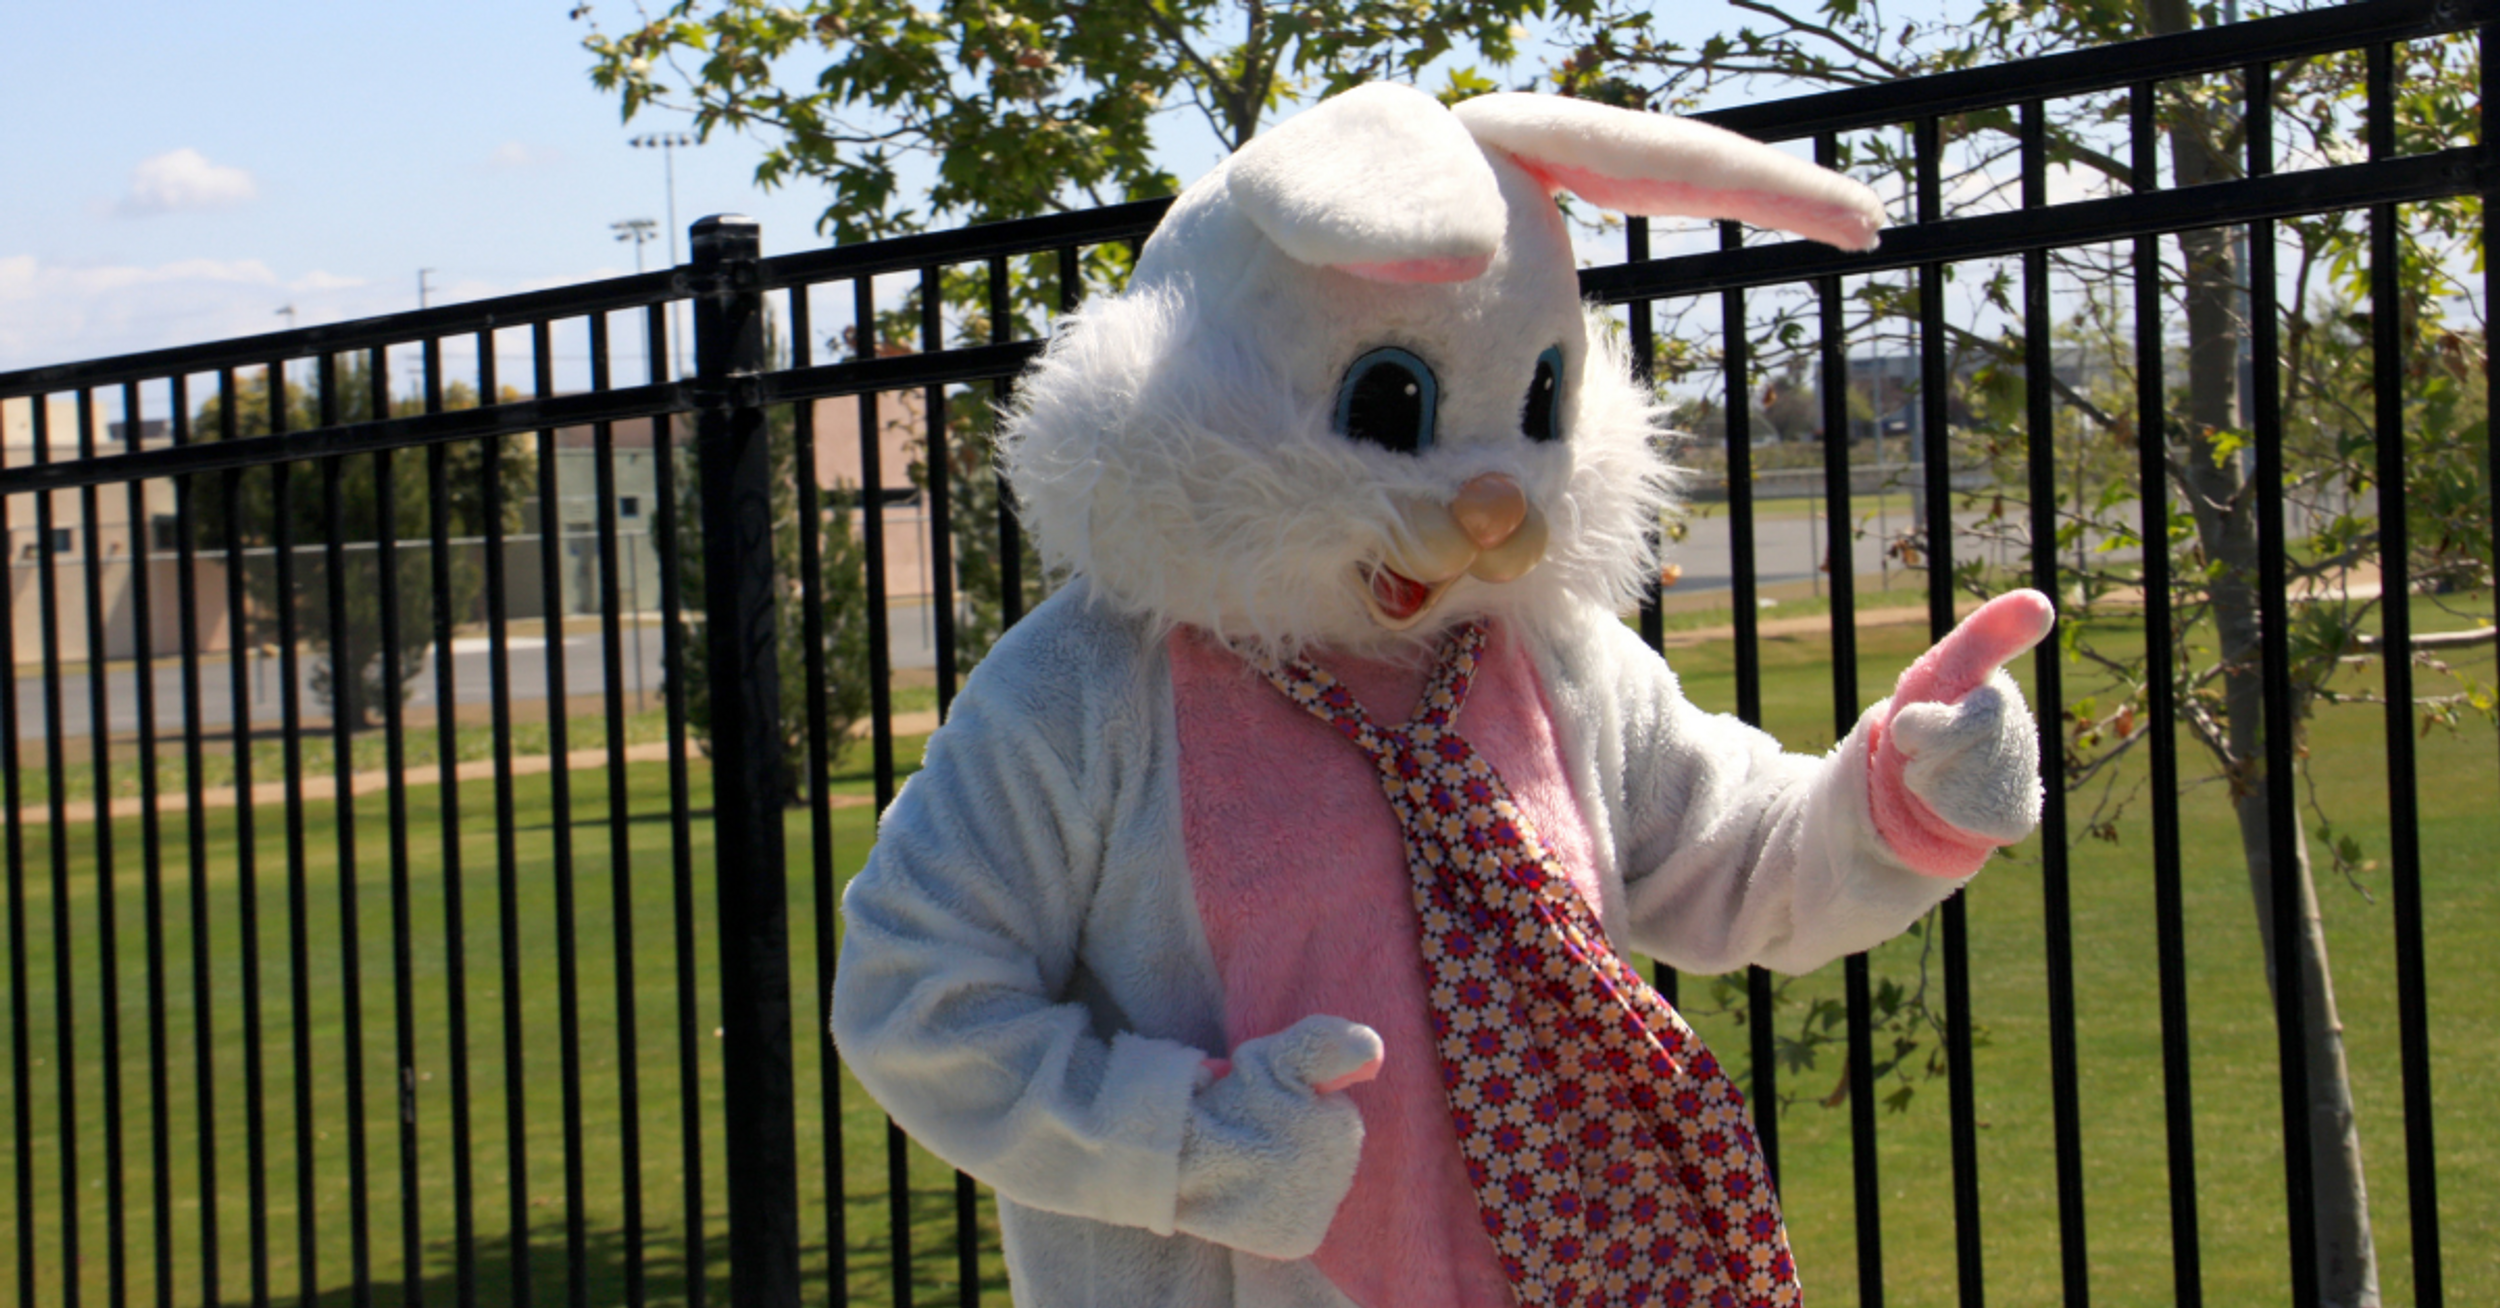 Texas Parents Outraged After Easter Bunny Accidentally Hands Out Condom-Stuffed Eggs At School